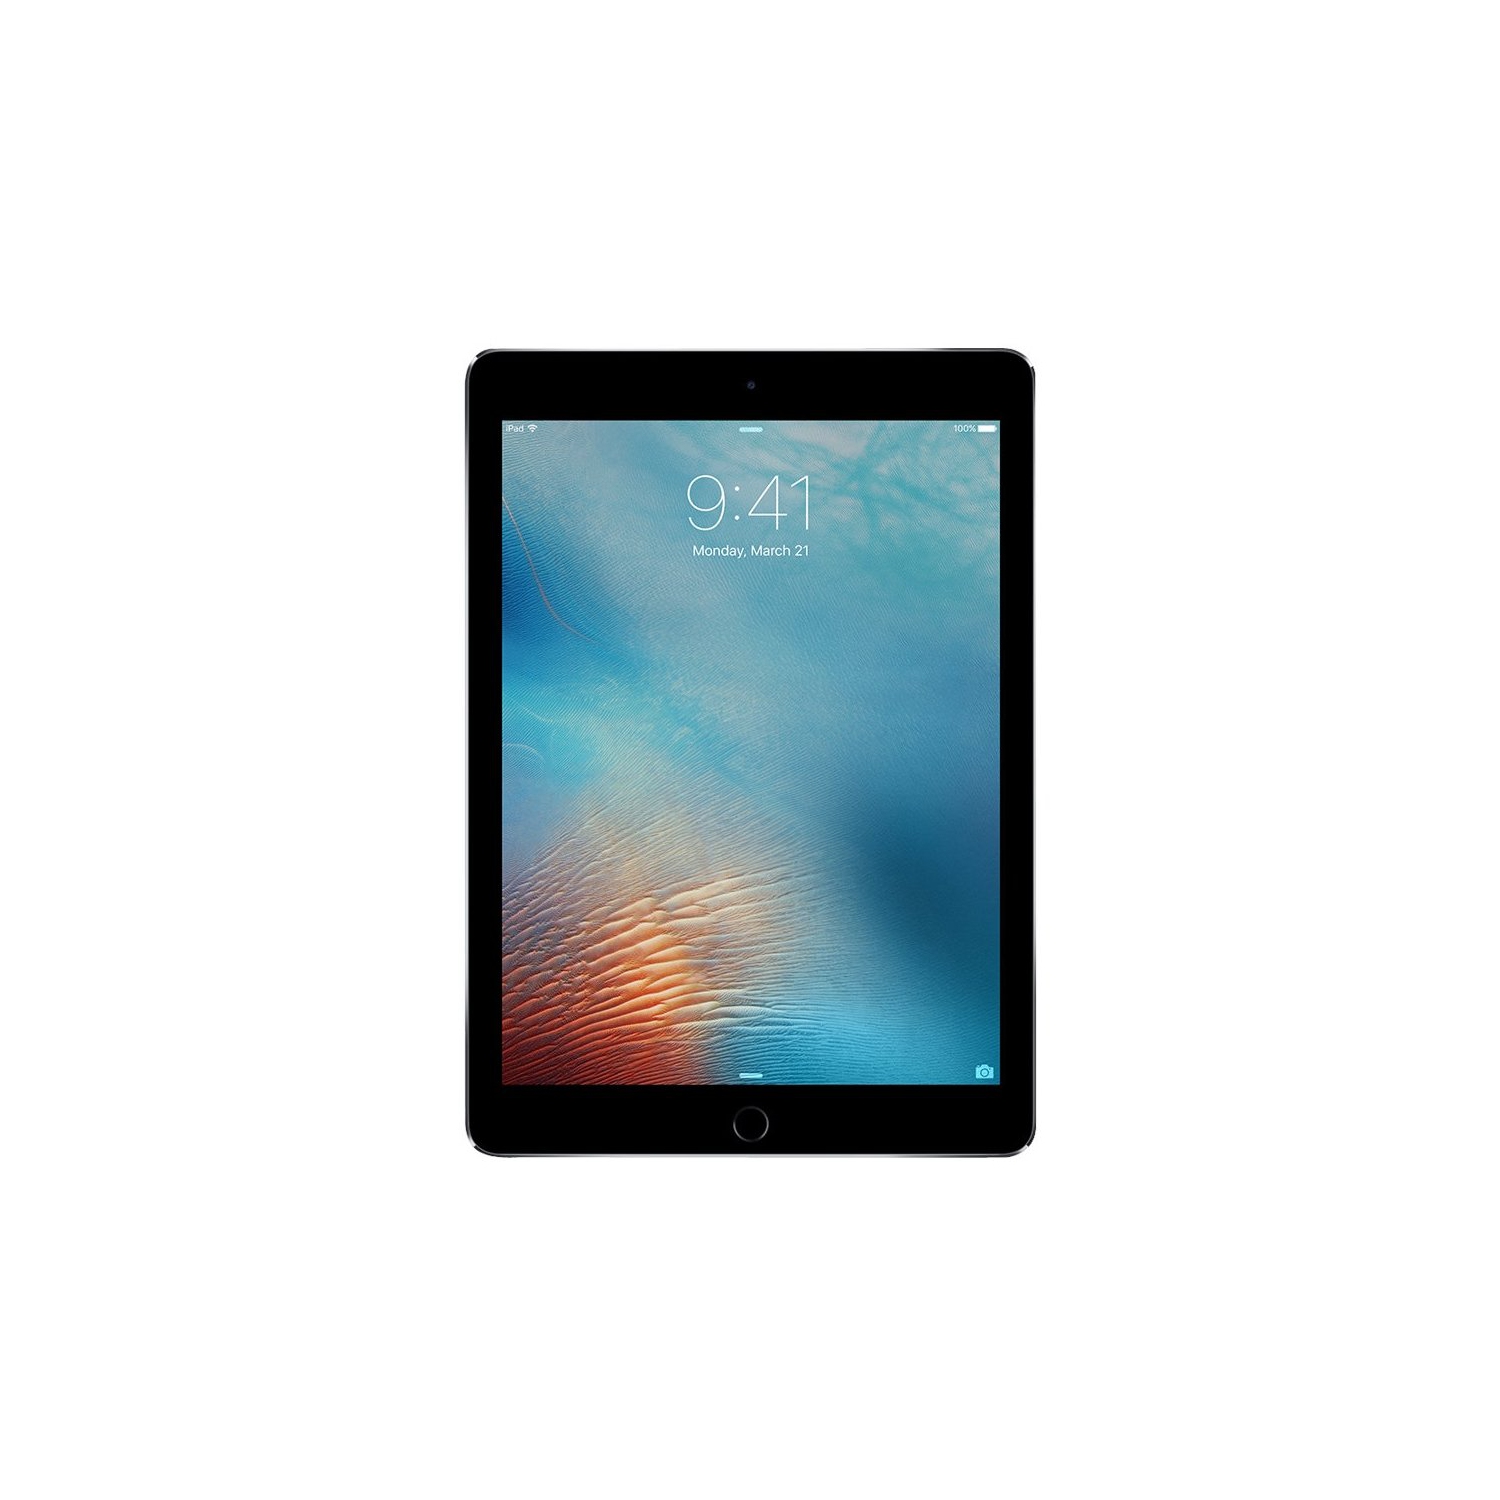 Refurbished (Excellent) - Apple iPad Pro 9.7" screen 128GB - WiFi (2016 - A1673) Space Gray - Certified Refurbished